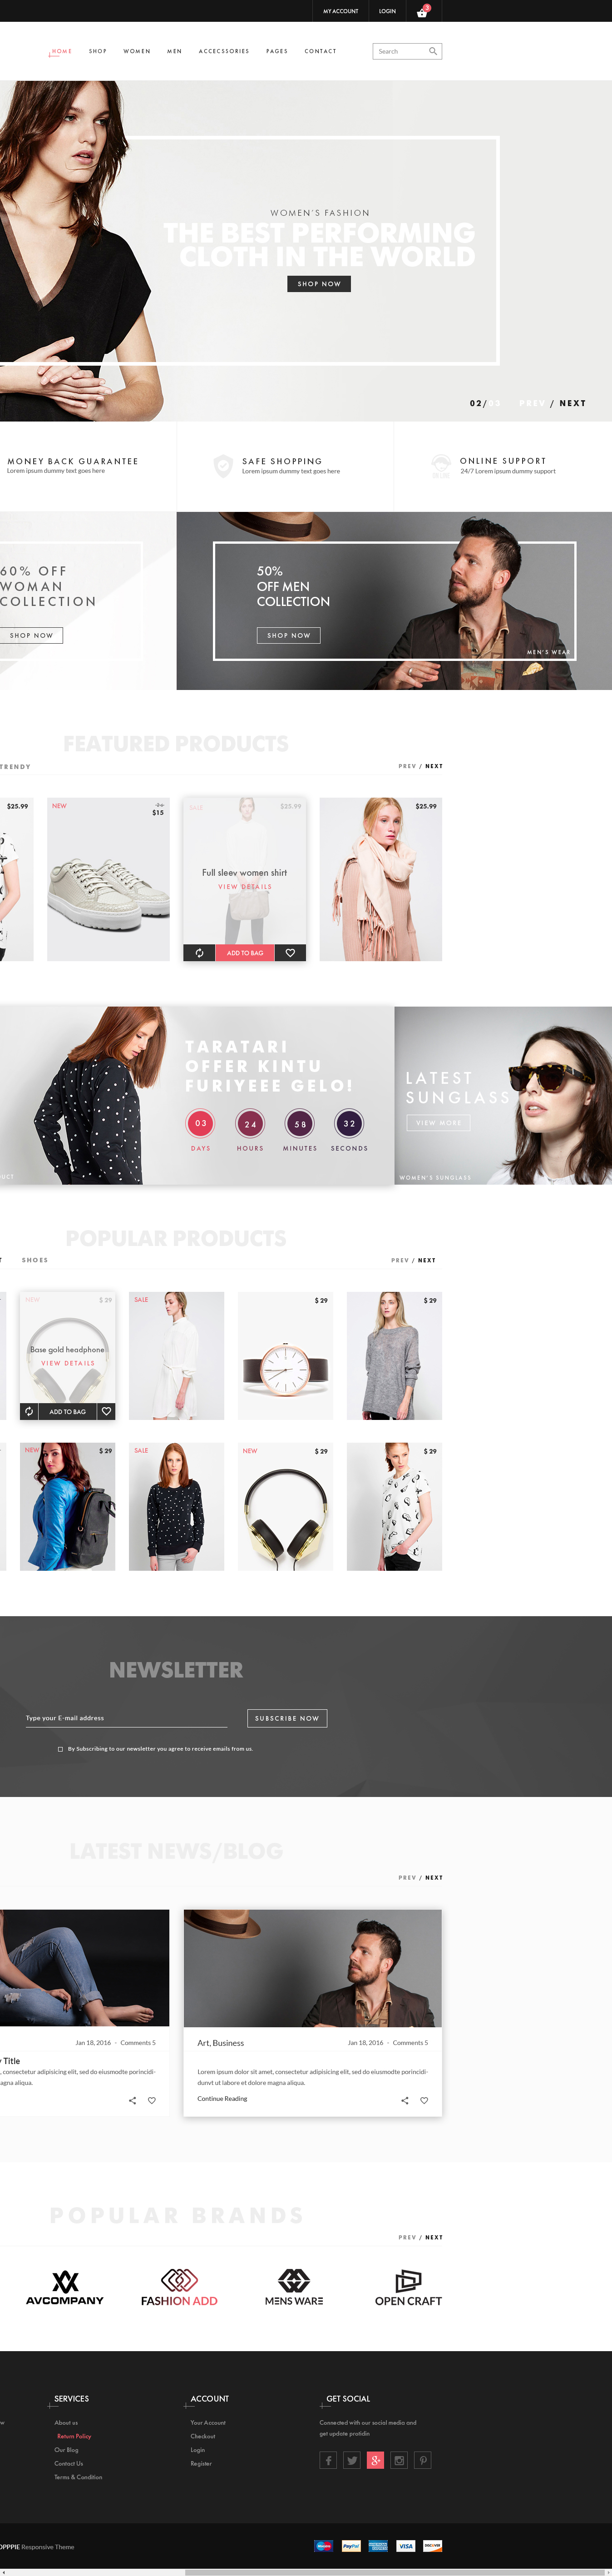 Shopppie – Fashion eCommerce PSD Template by $1 PSD Template on Dribbble